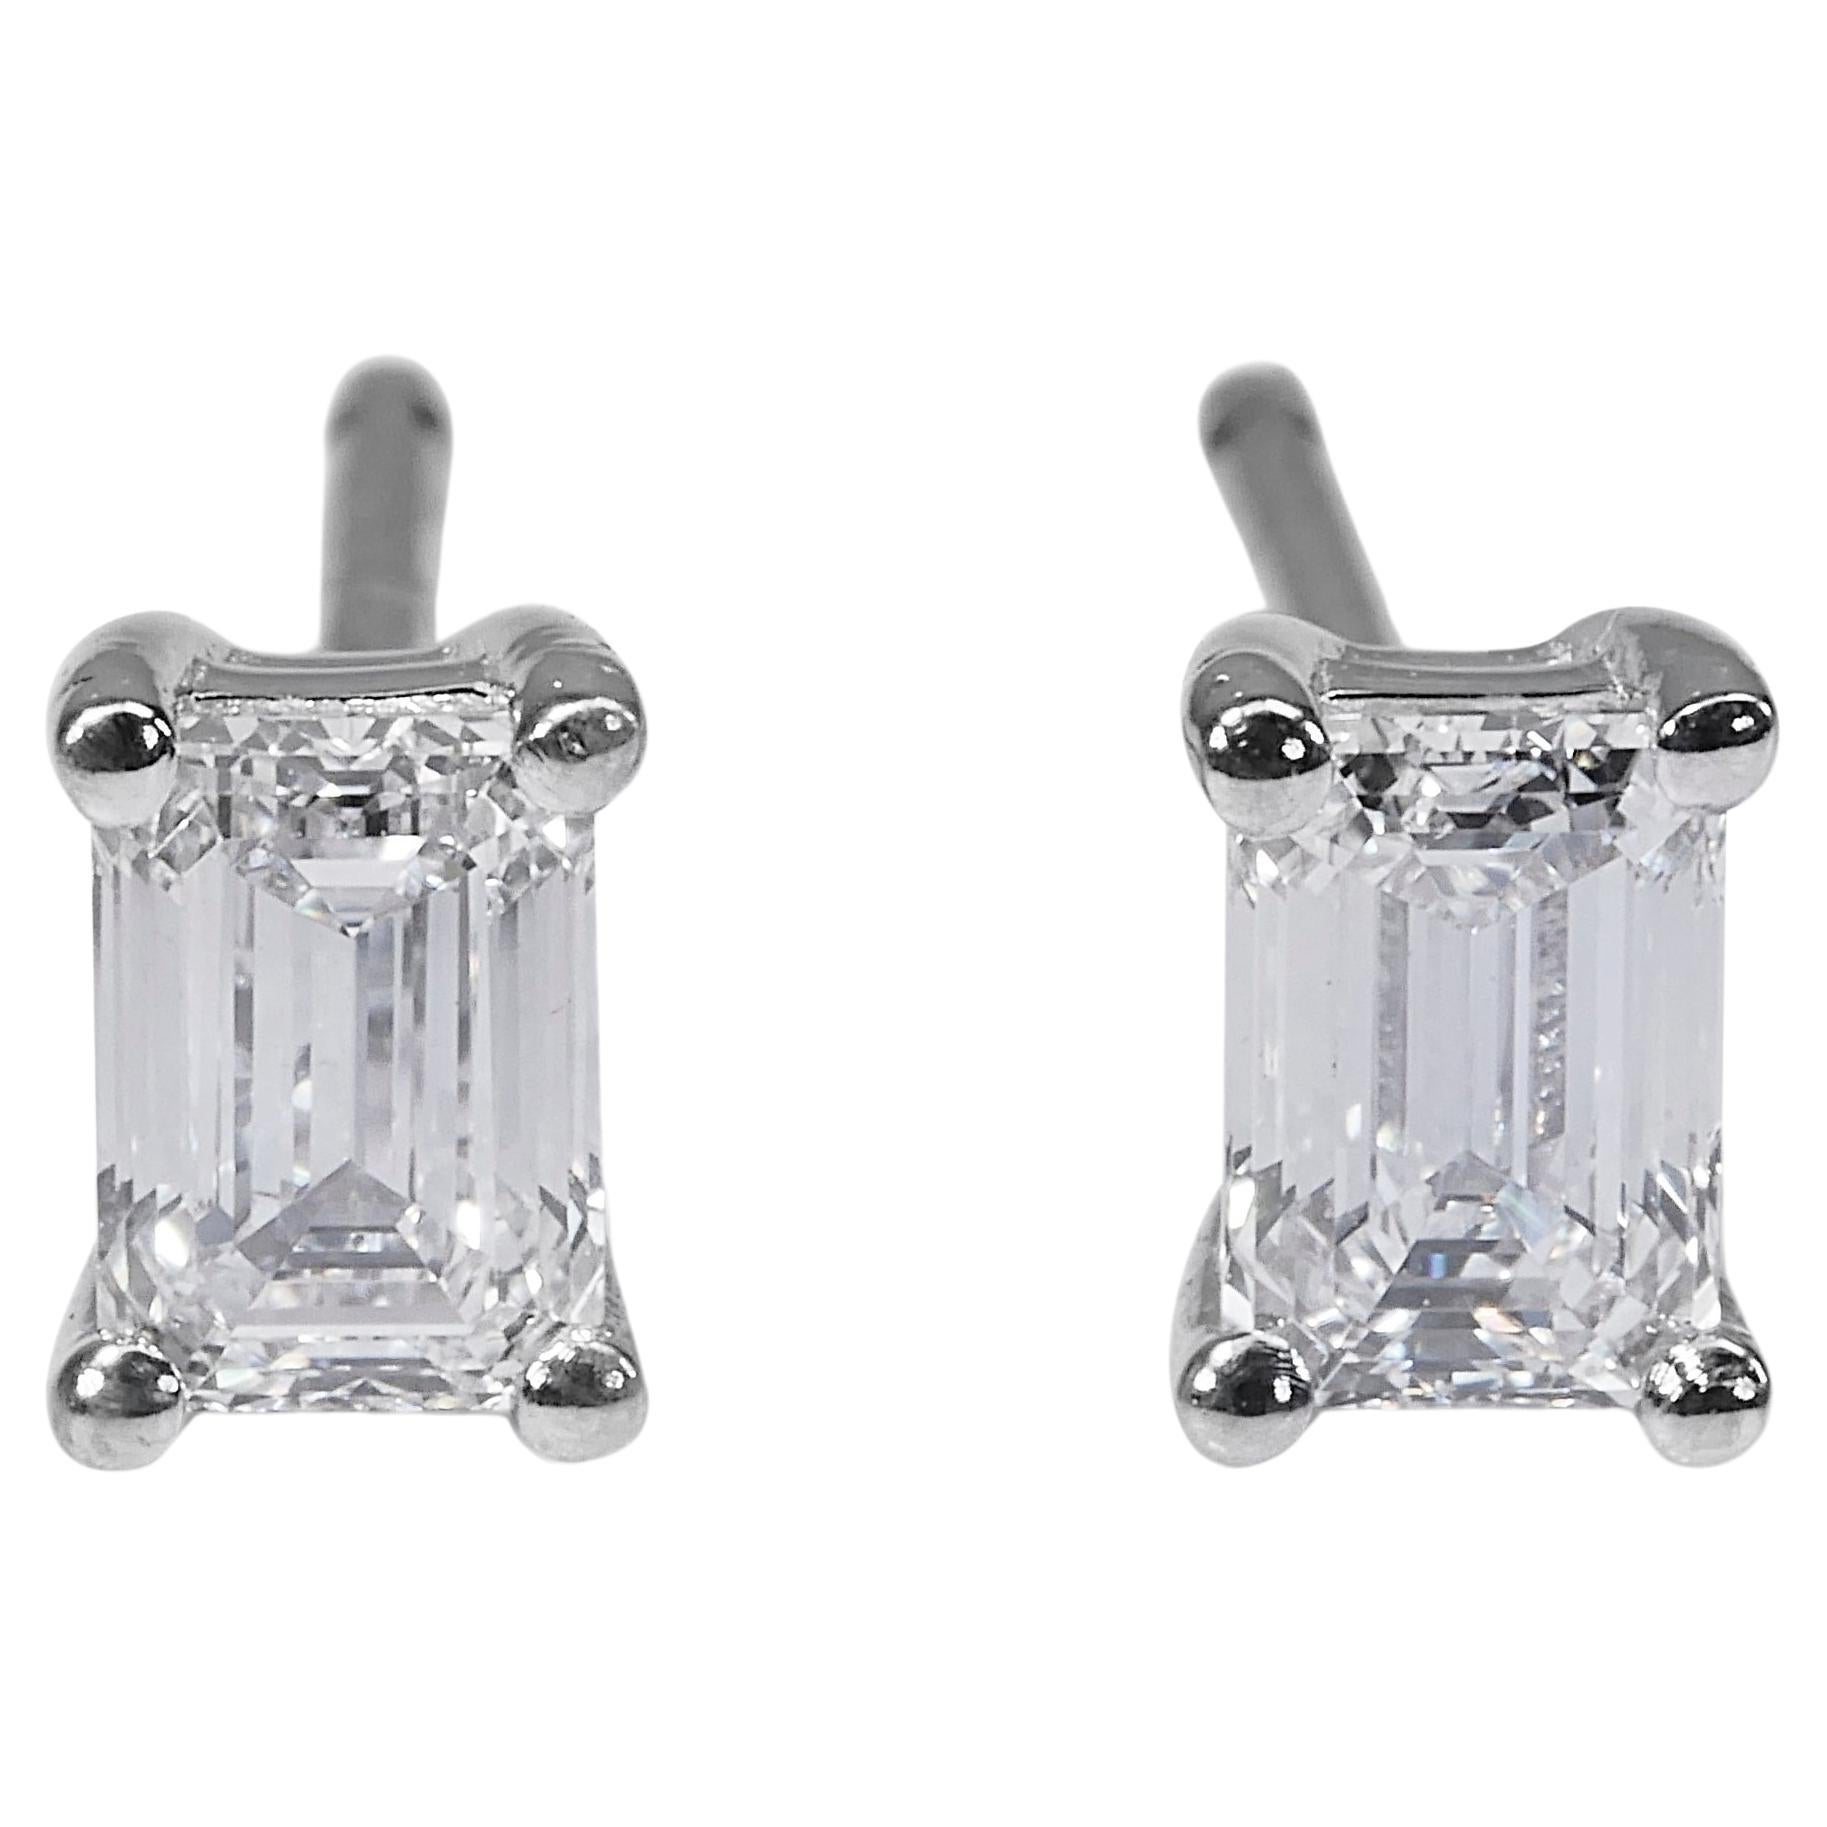 Classic 1.48ct Emerald-Cut Diamond Stud Earrings in 18k White Gold - GIA  For Sale